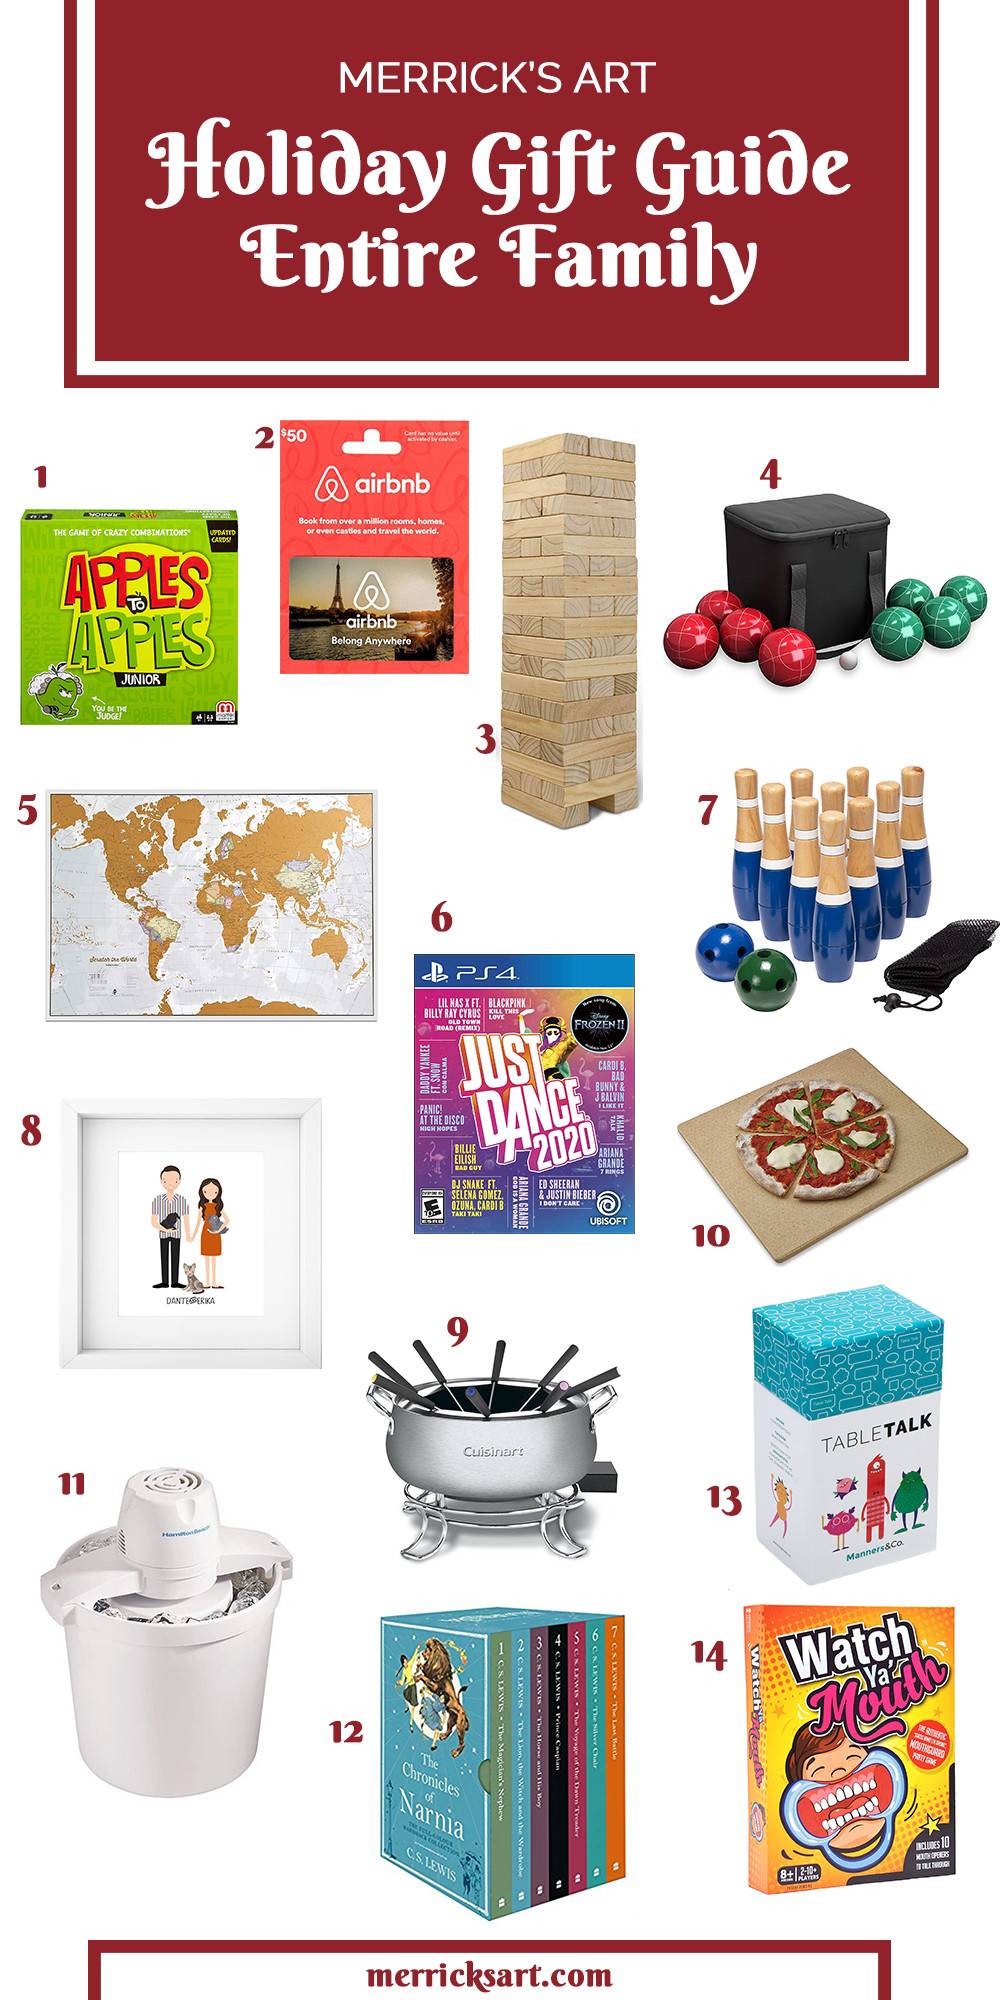 Holiday Gift Ideas For Family
 Family Christmas Gifts Ideas for an Entire Family